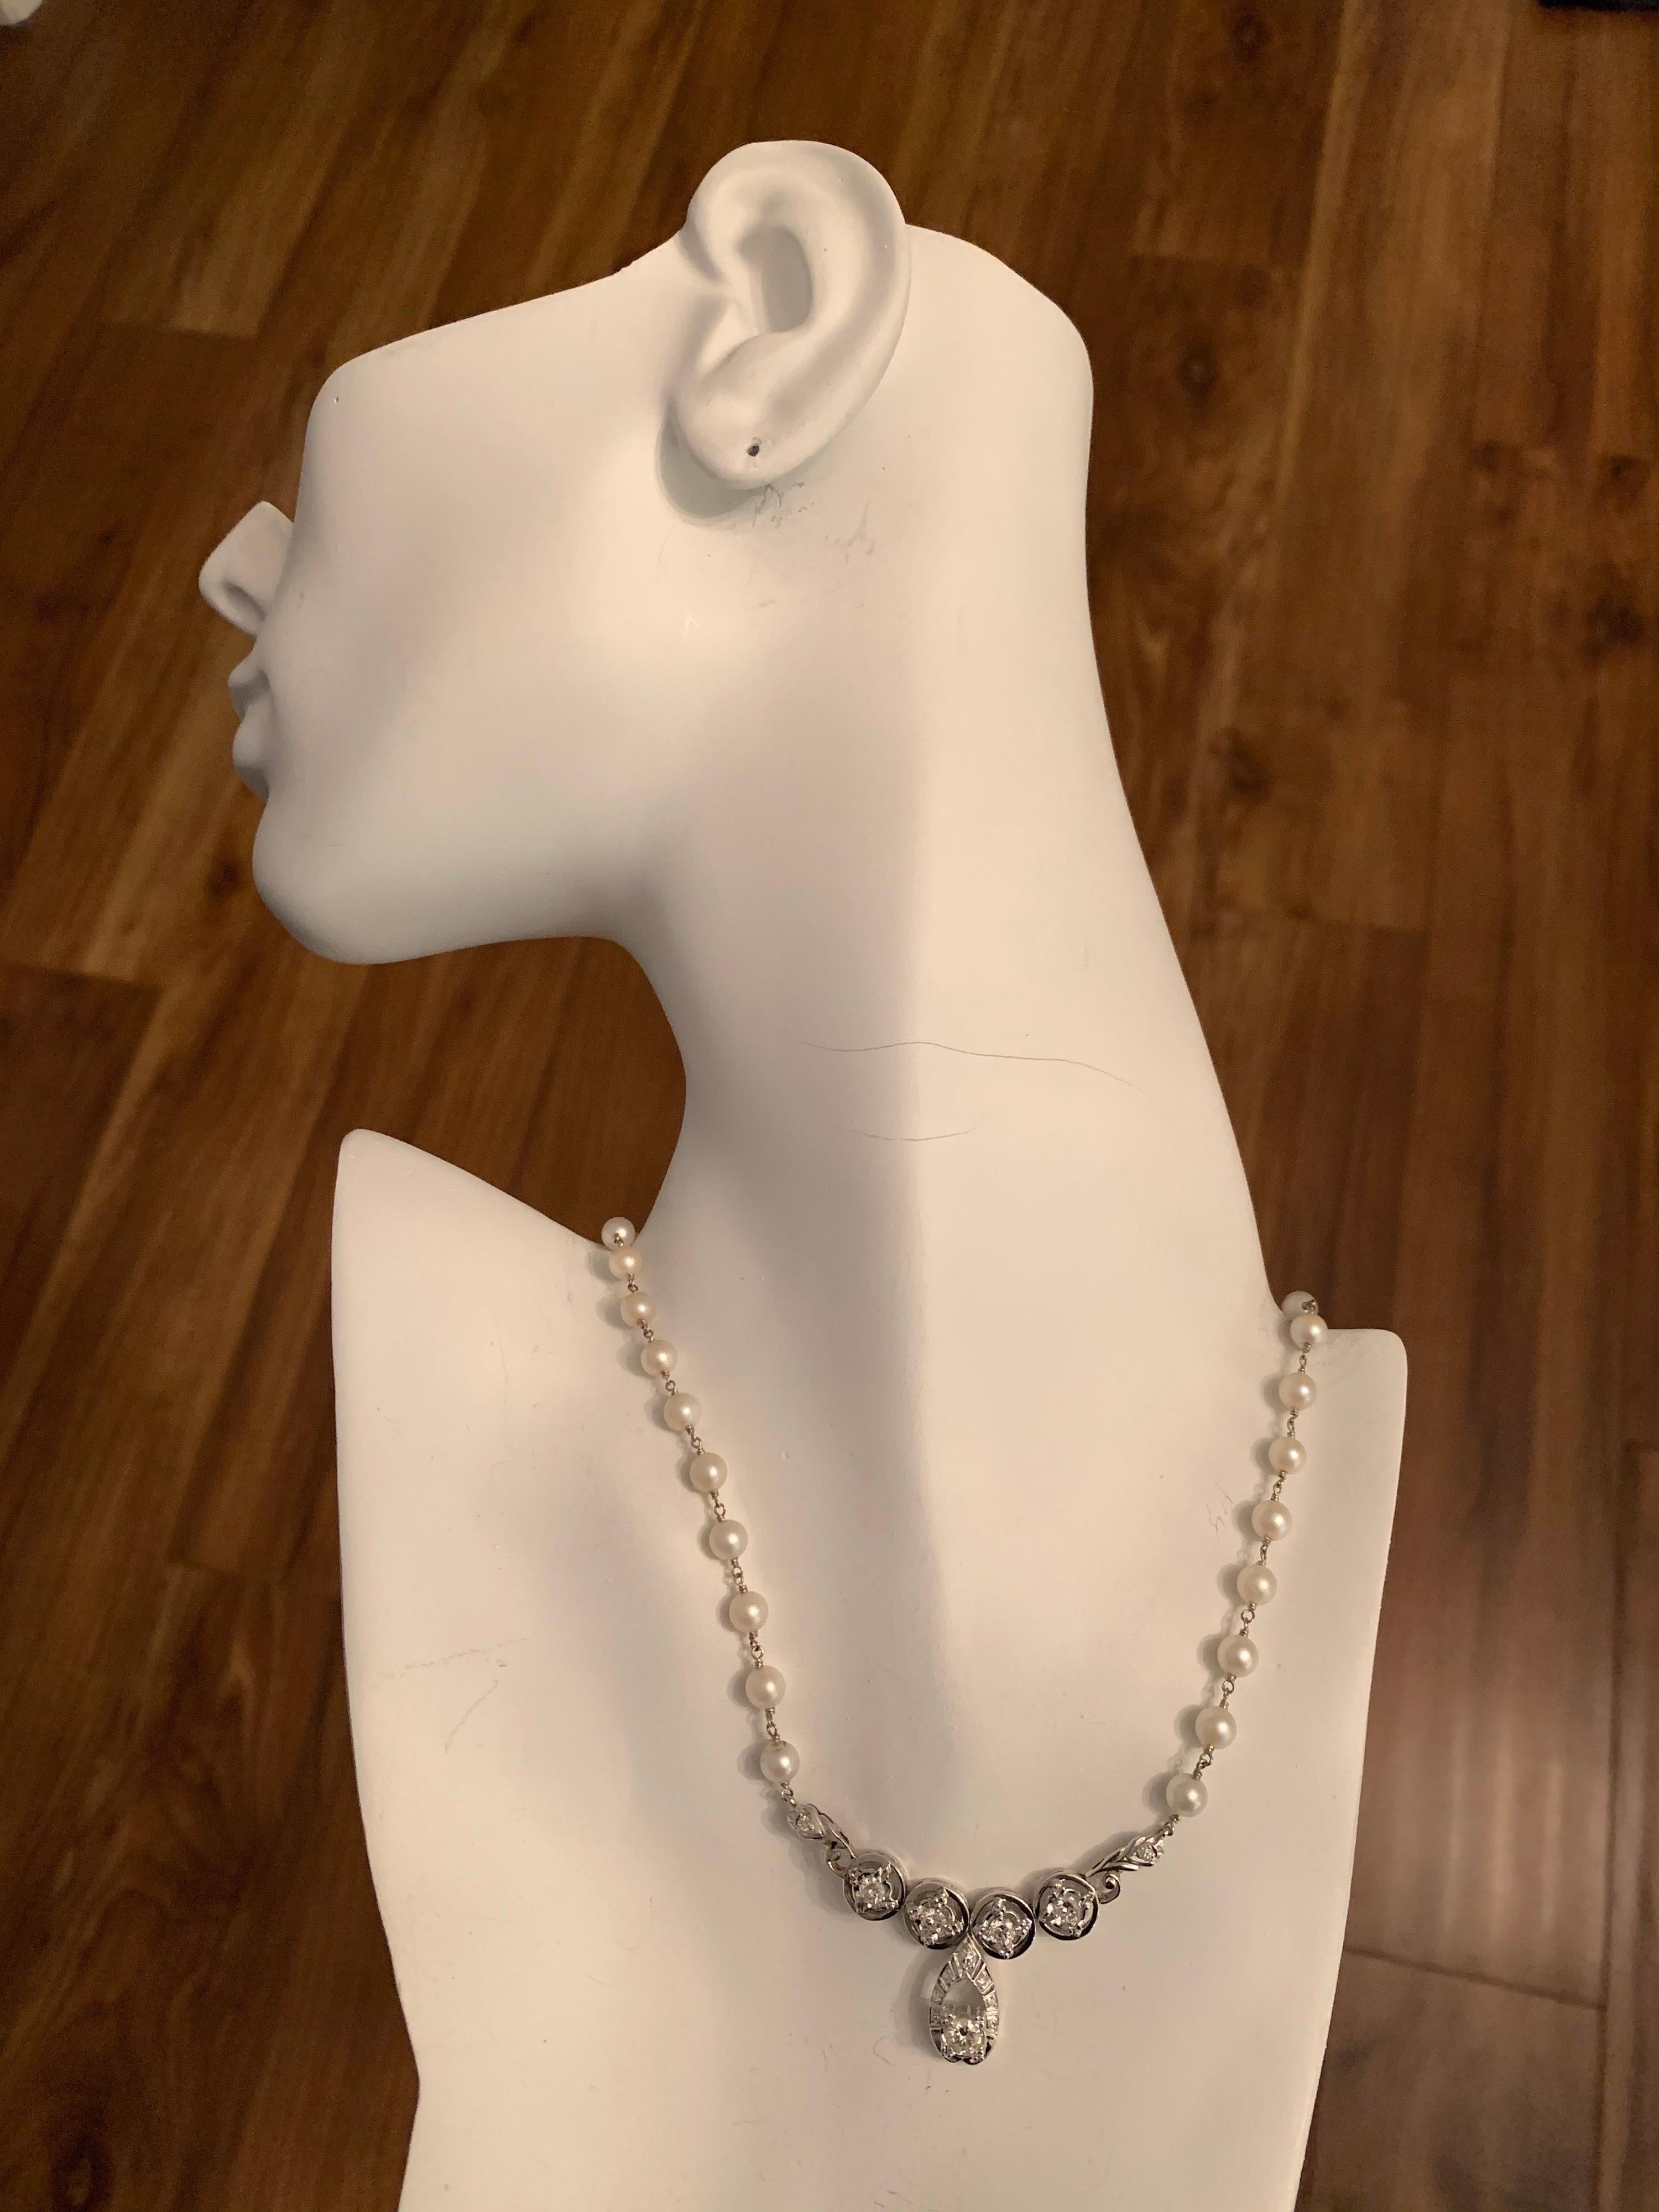 A stunning 14k white gold, diamond and pearl vintage necklace. The 14 Natural Diamonds range from G-I color and SI-VS in clarity.

Weight is 14.46g. The piece is 16 inches in length .
